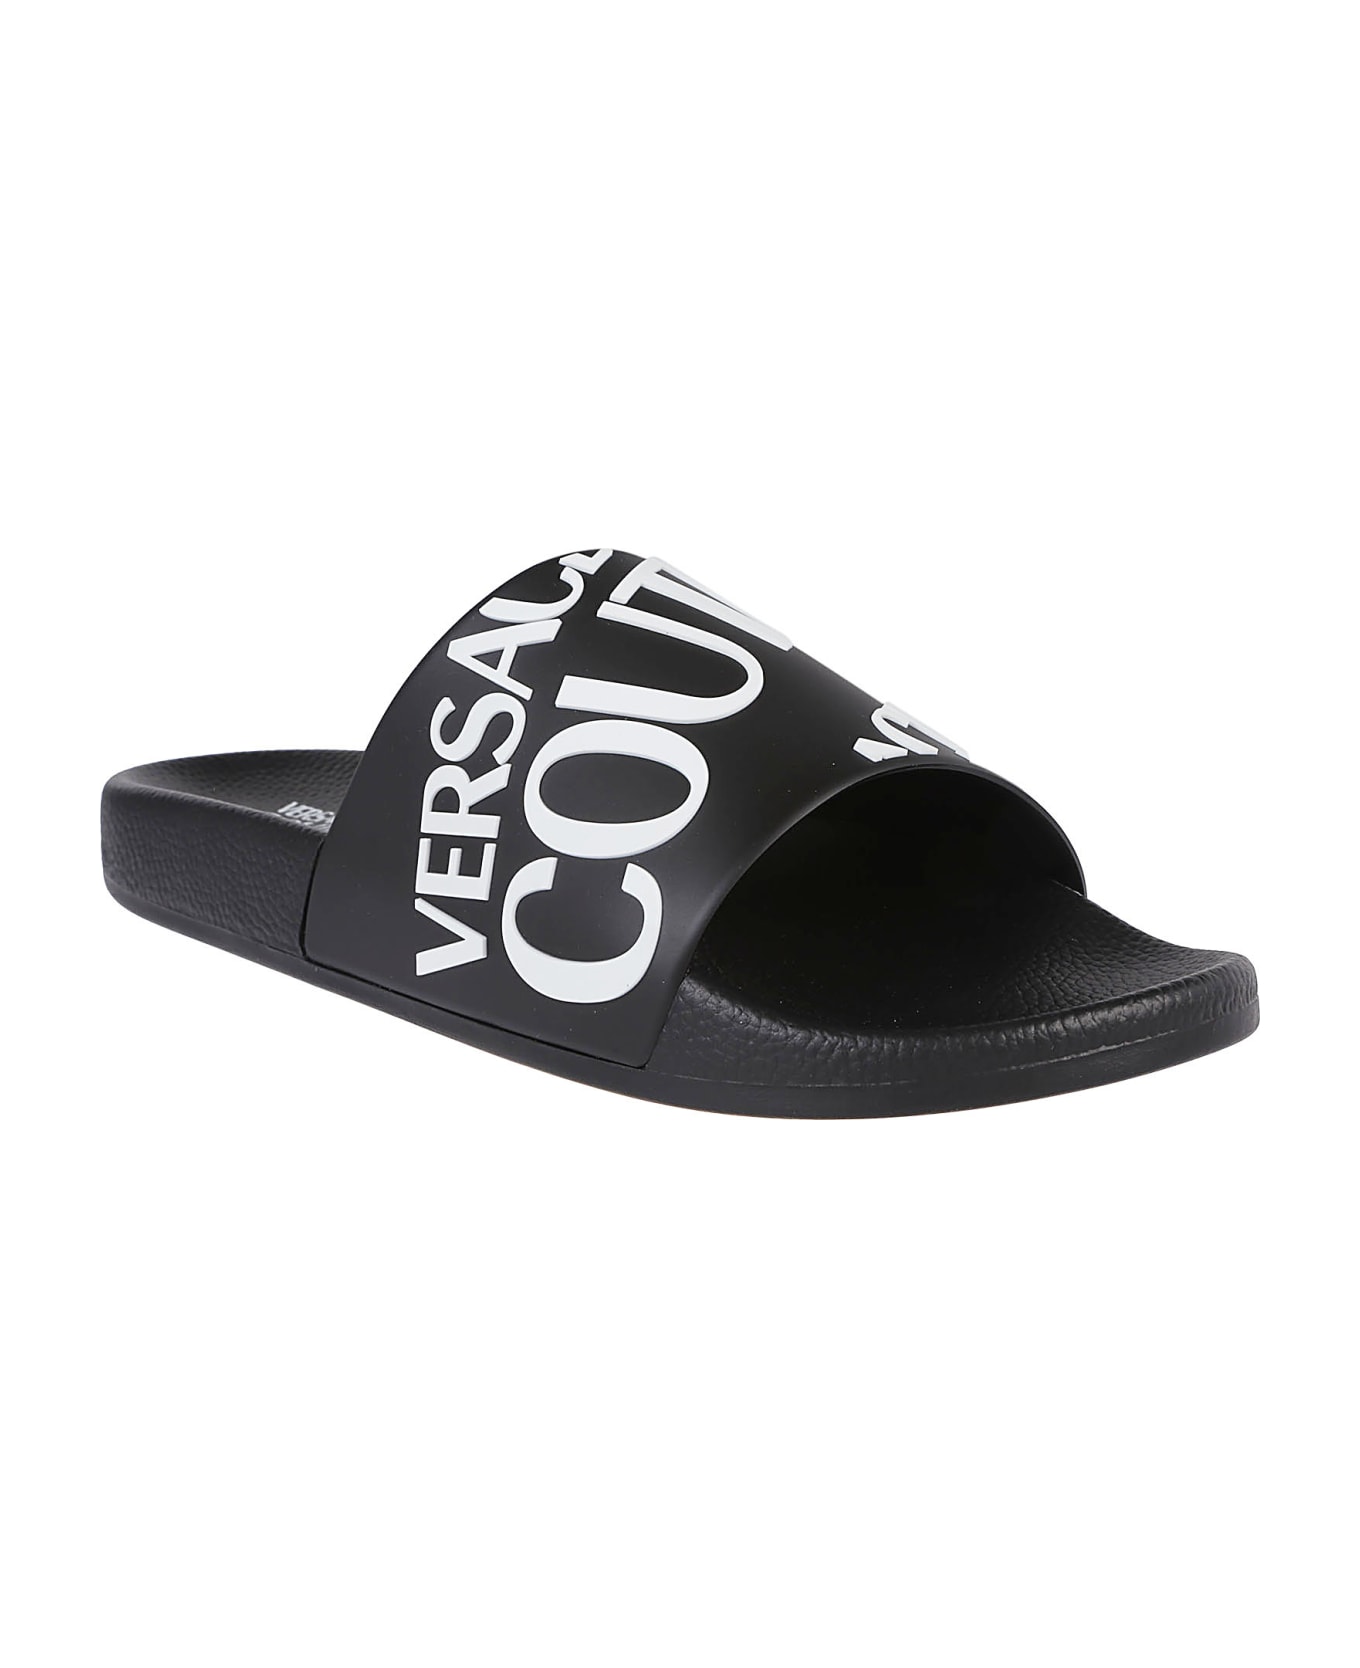 Versace Jeans Couture Gummy Sq1 Sliders - Black